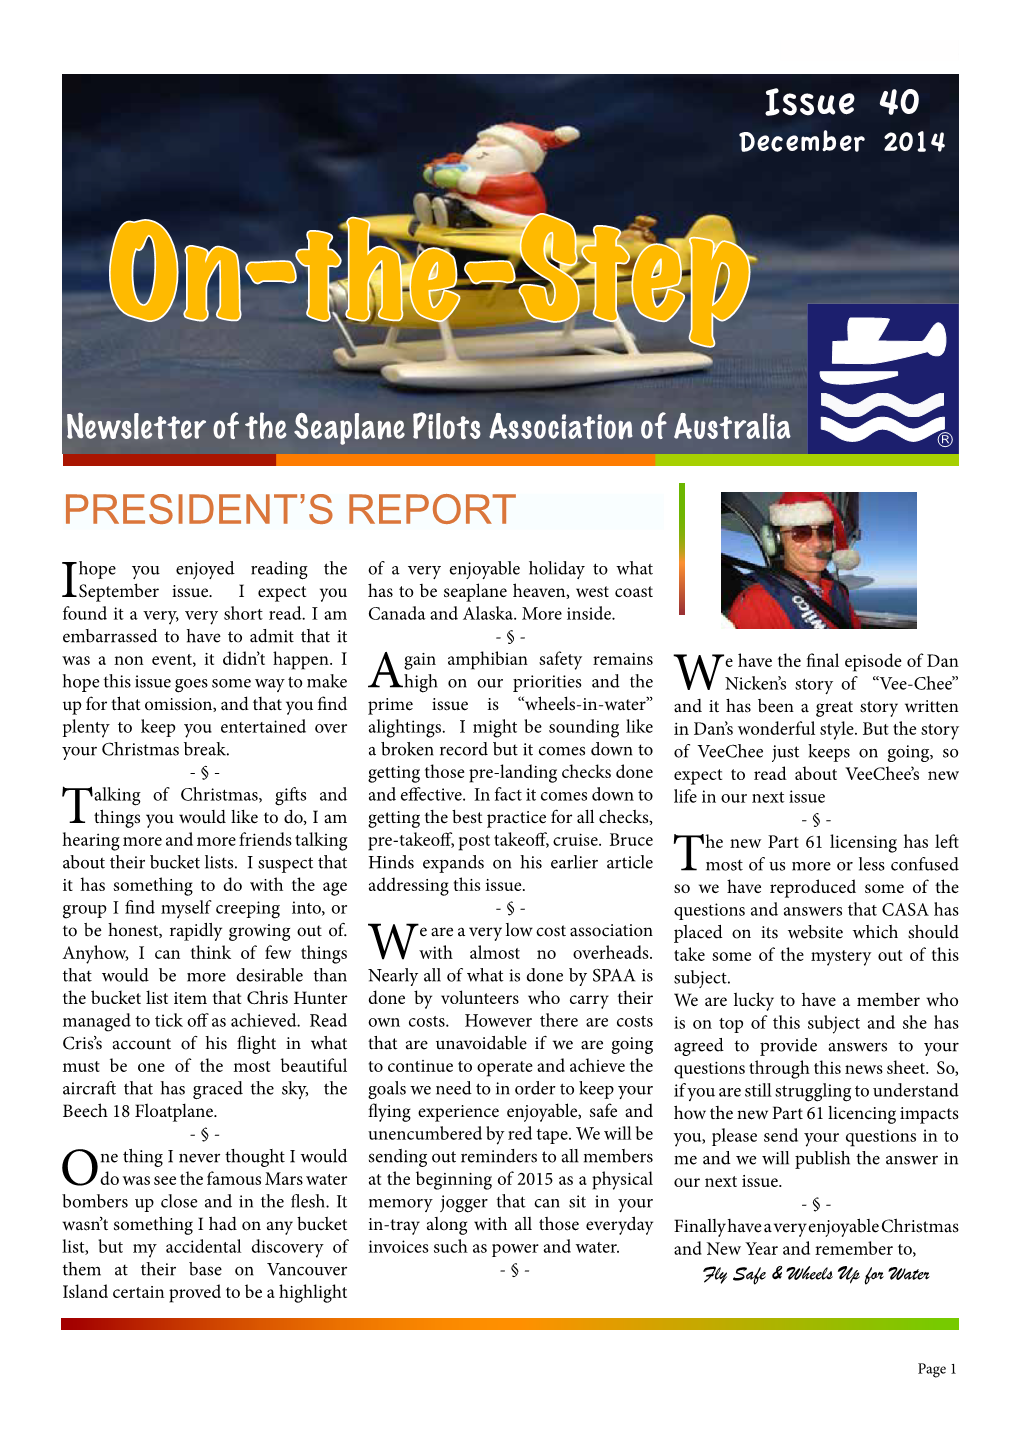 Issue 40 PRESIDENT's REPORT